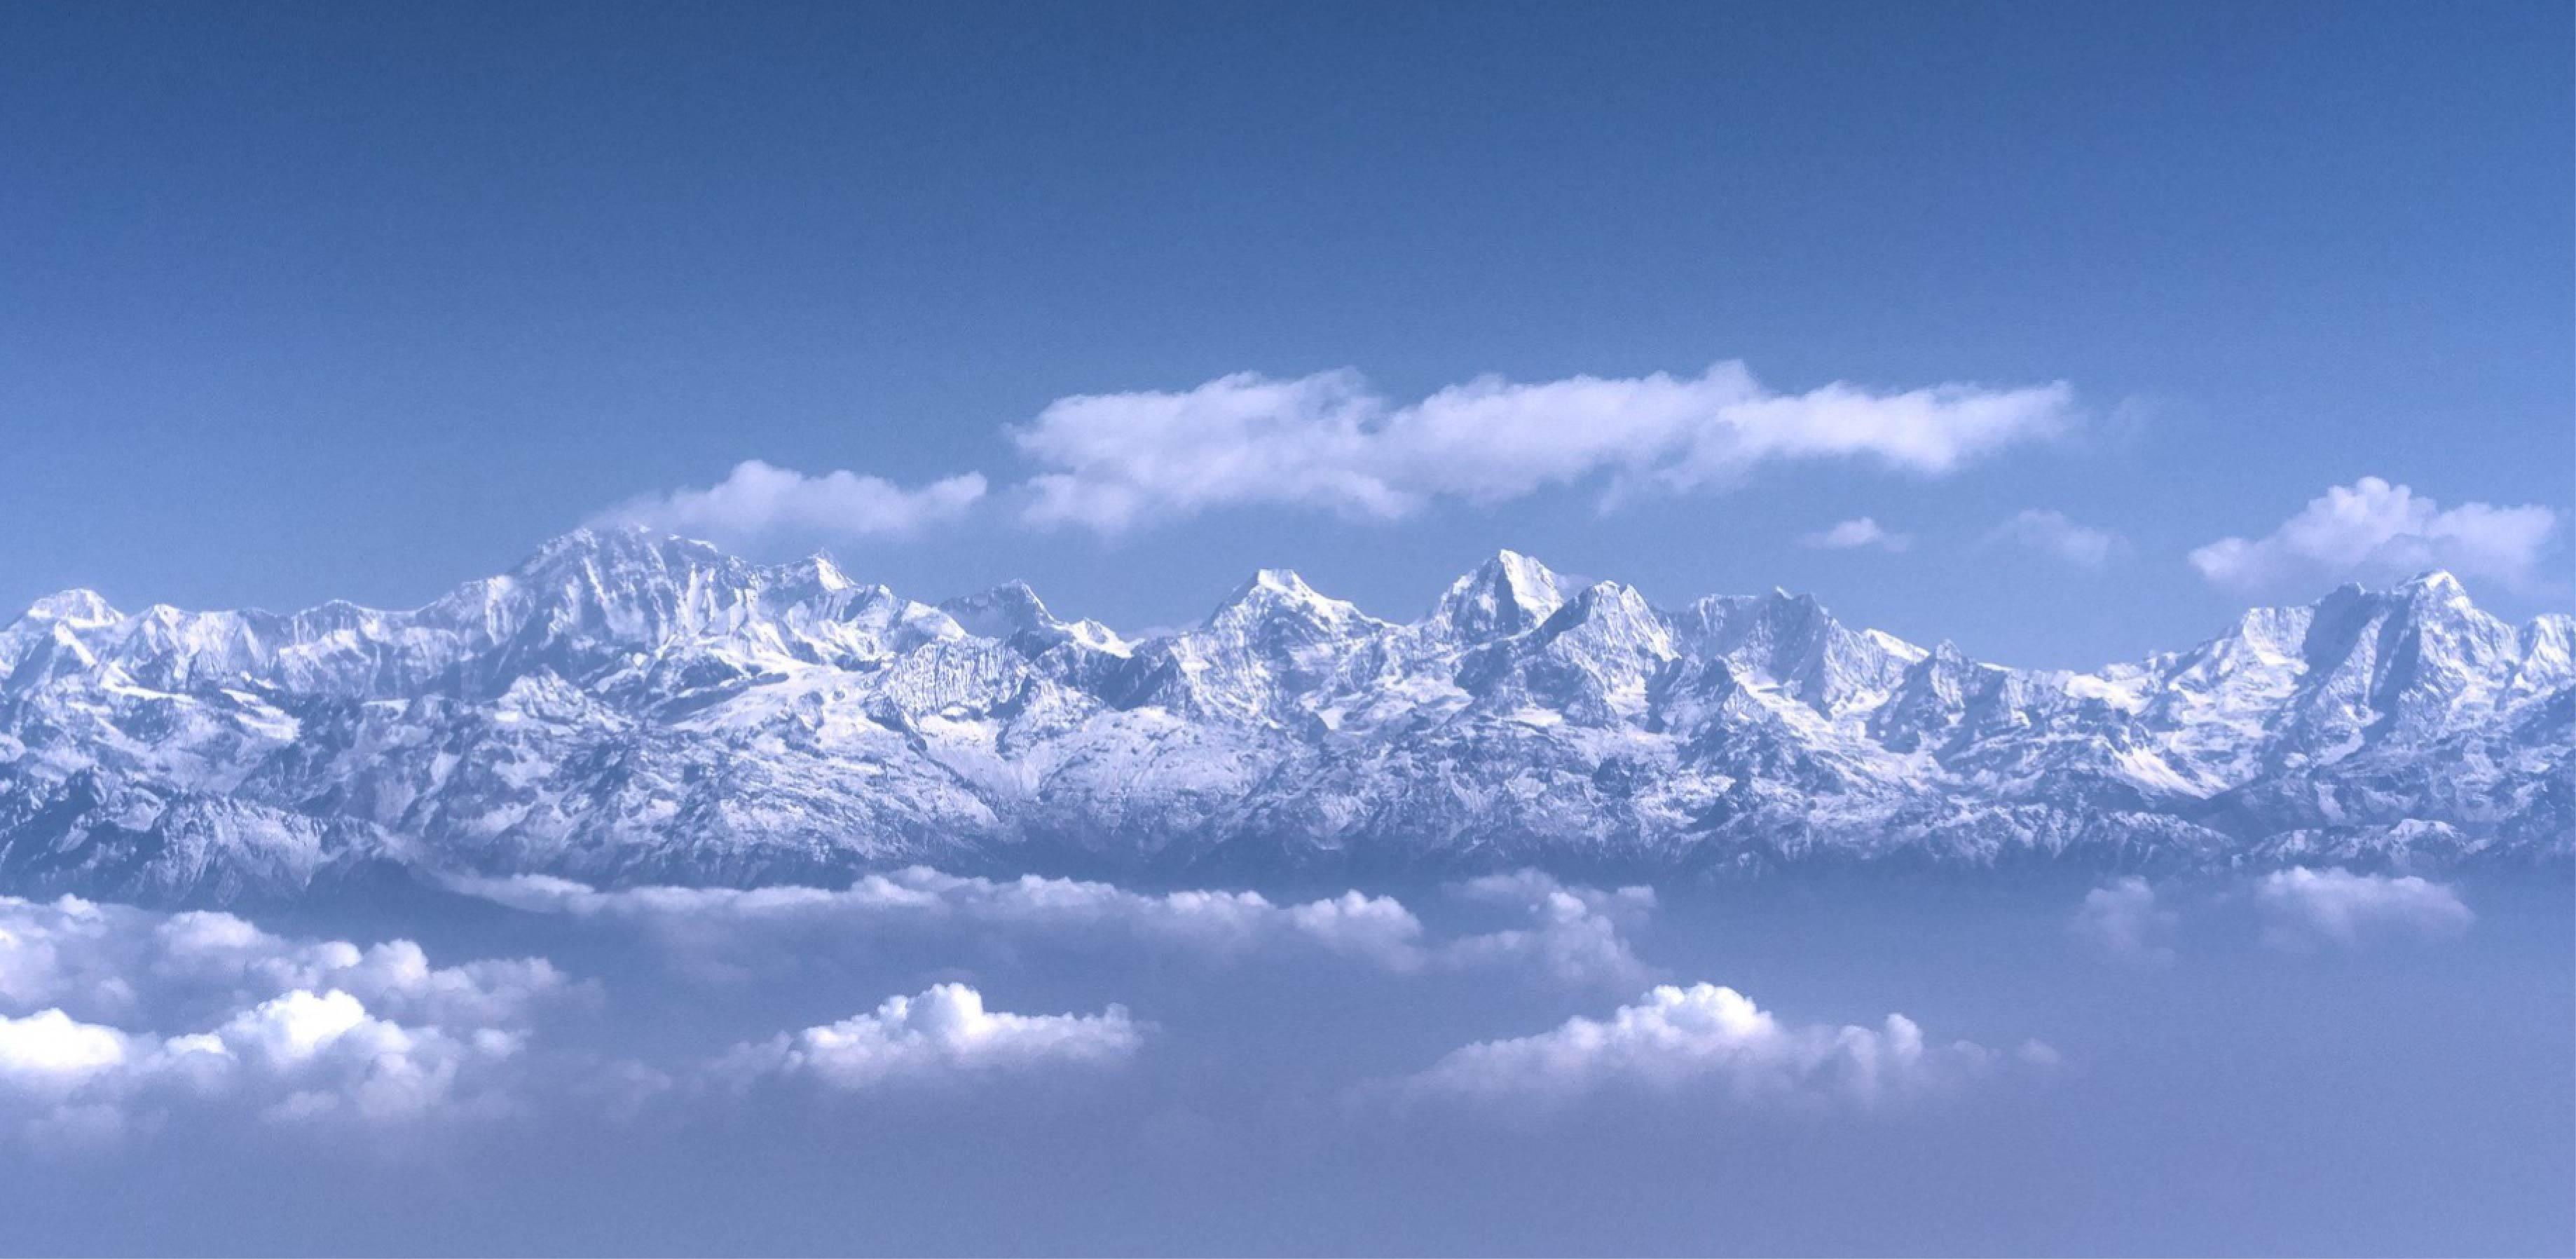 Image of the Himalayan mountains above the clouds